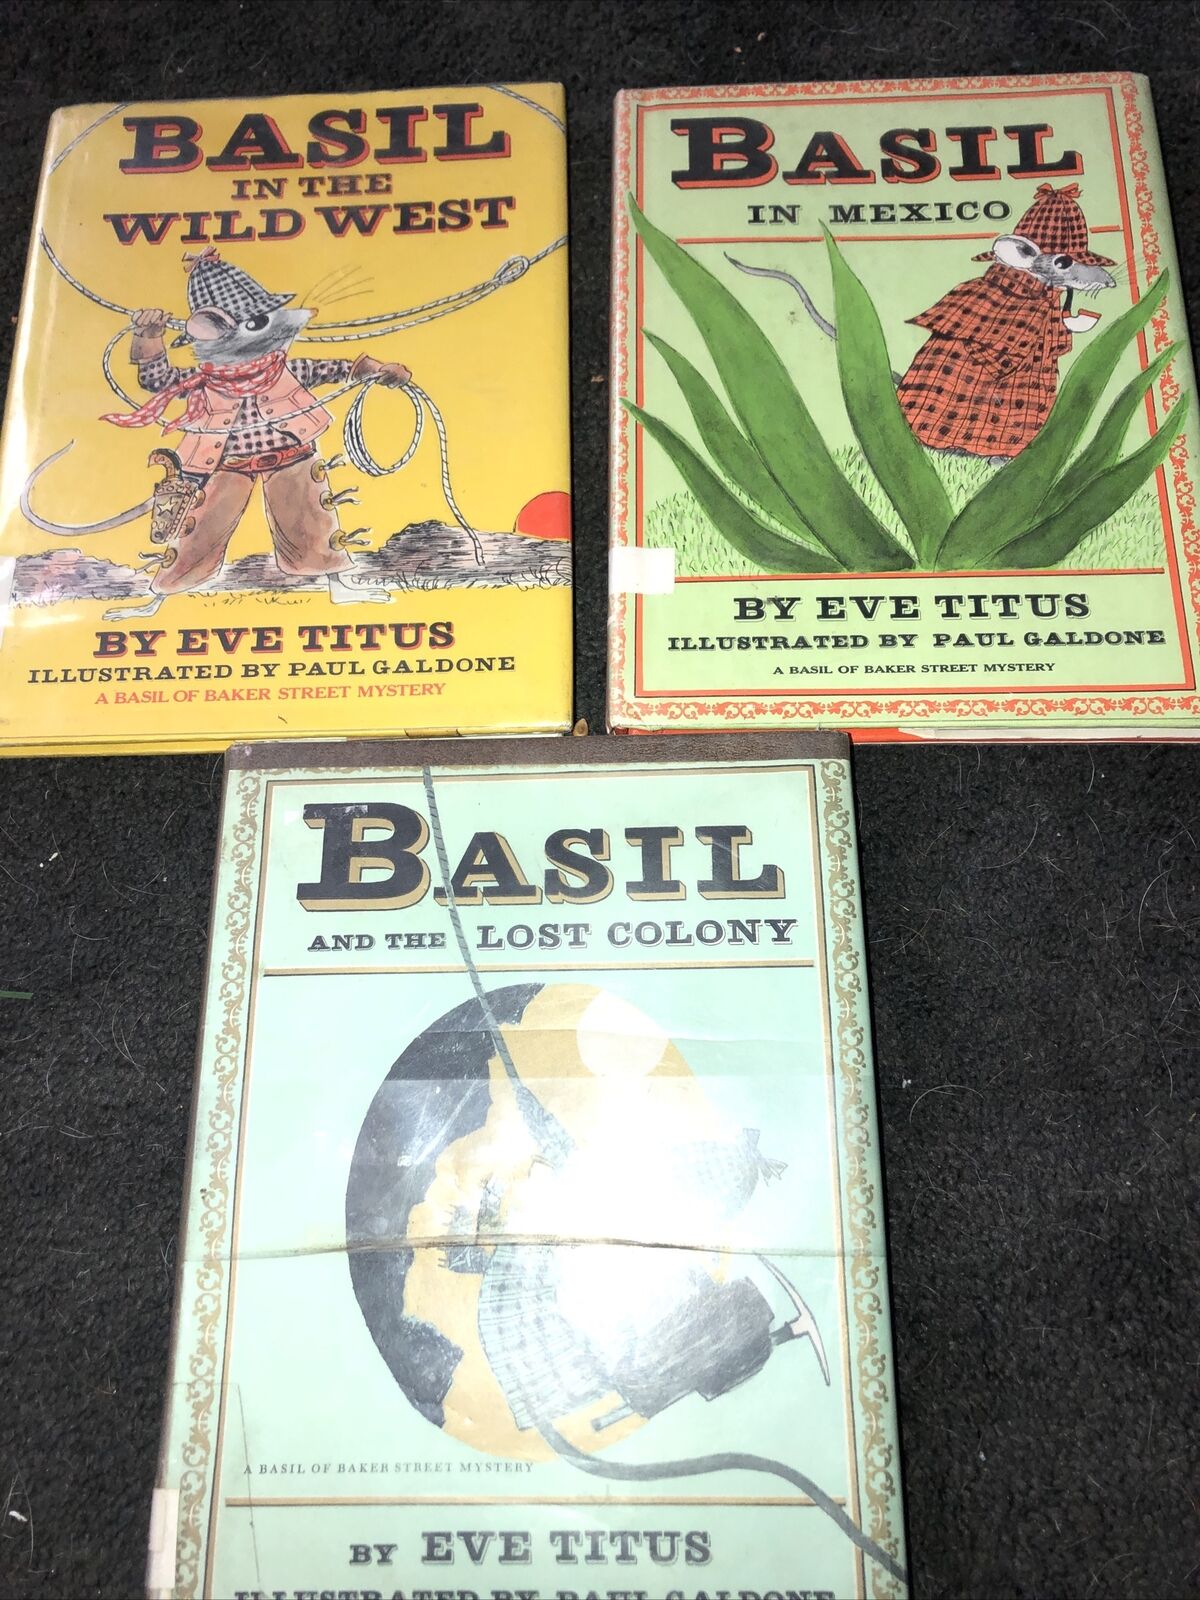 basil in the wild west, Basil In Mexico, Lost Colony first edition